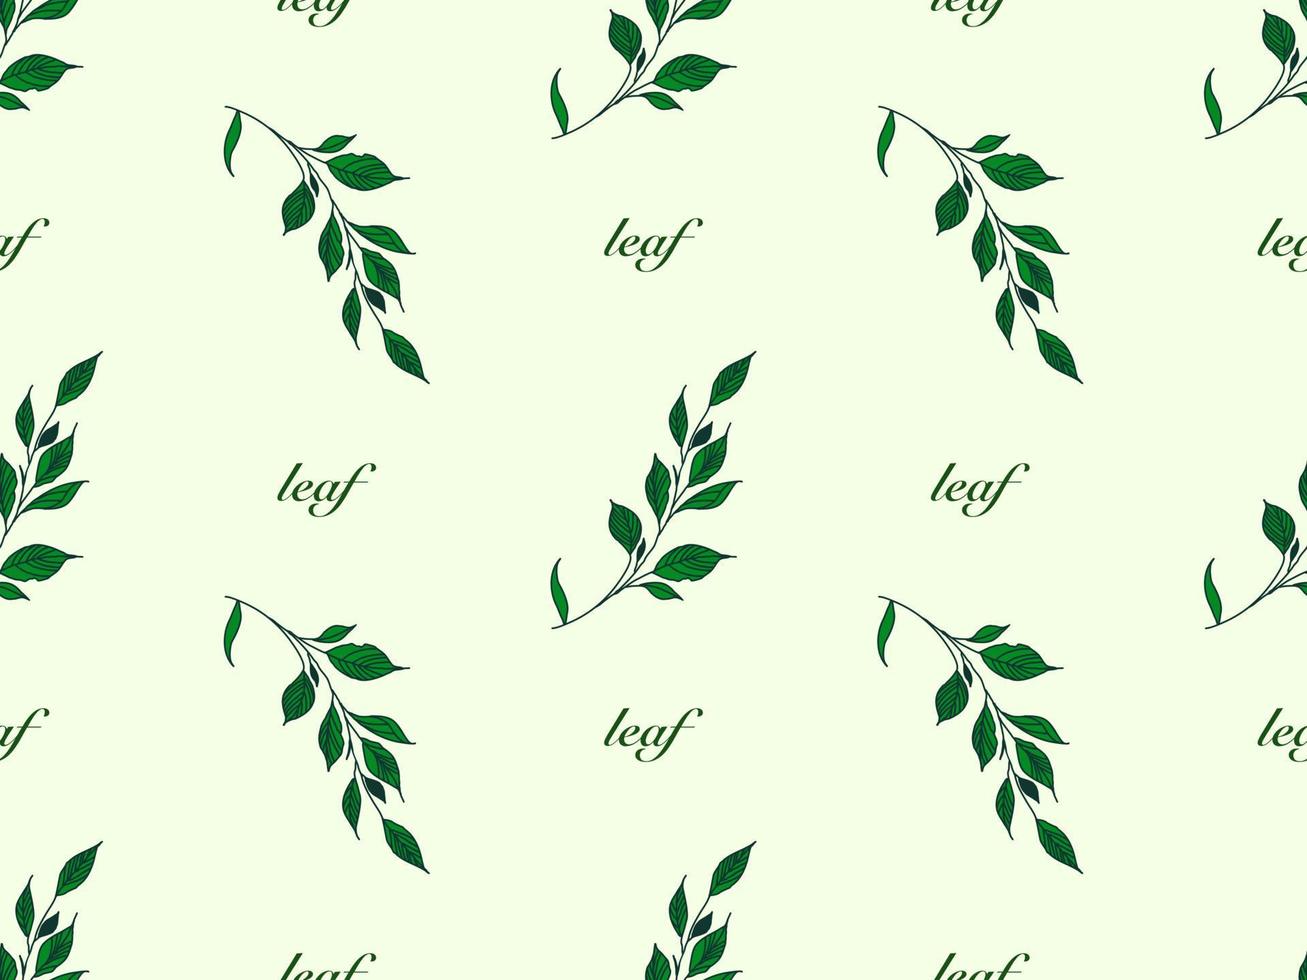 Leaf cartoon character seamless pattern on green background vector